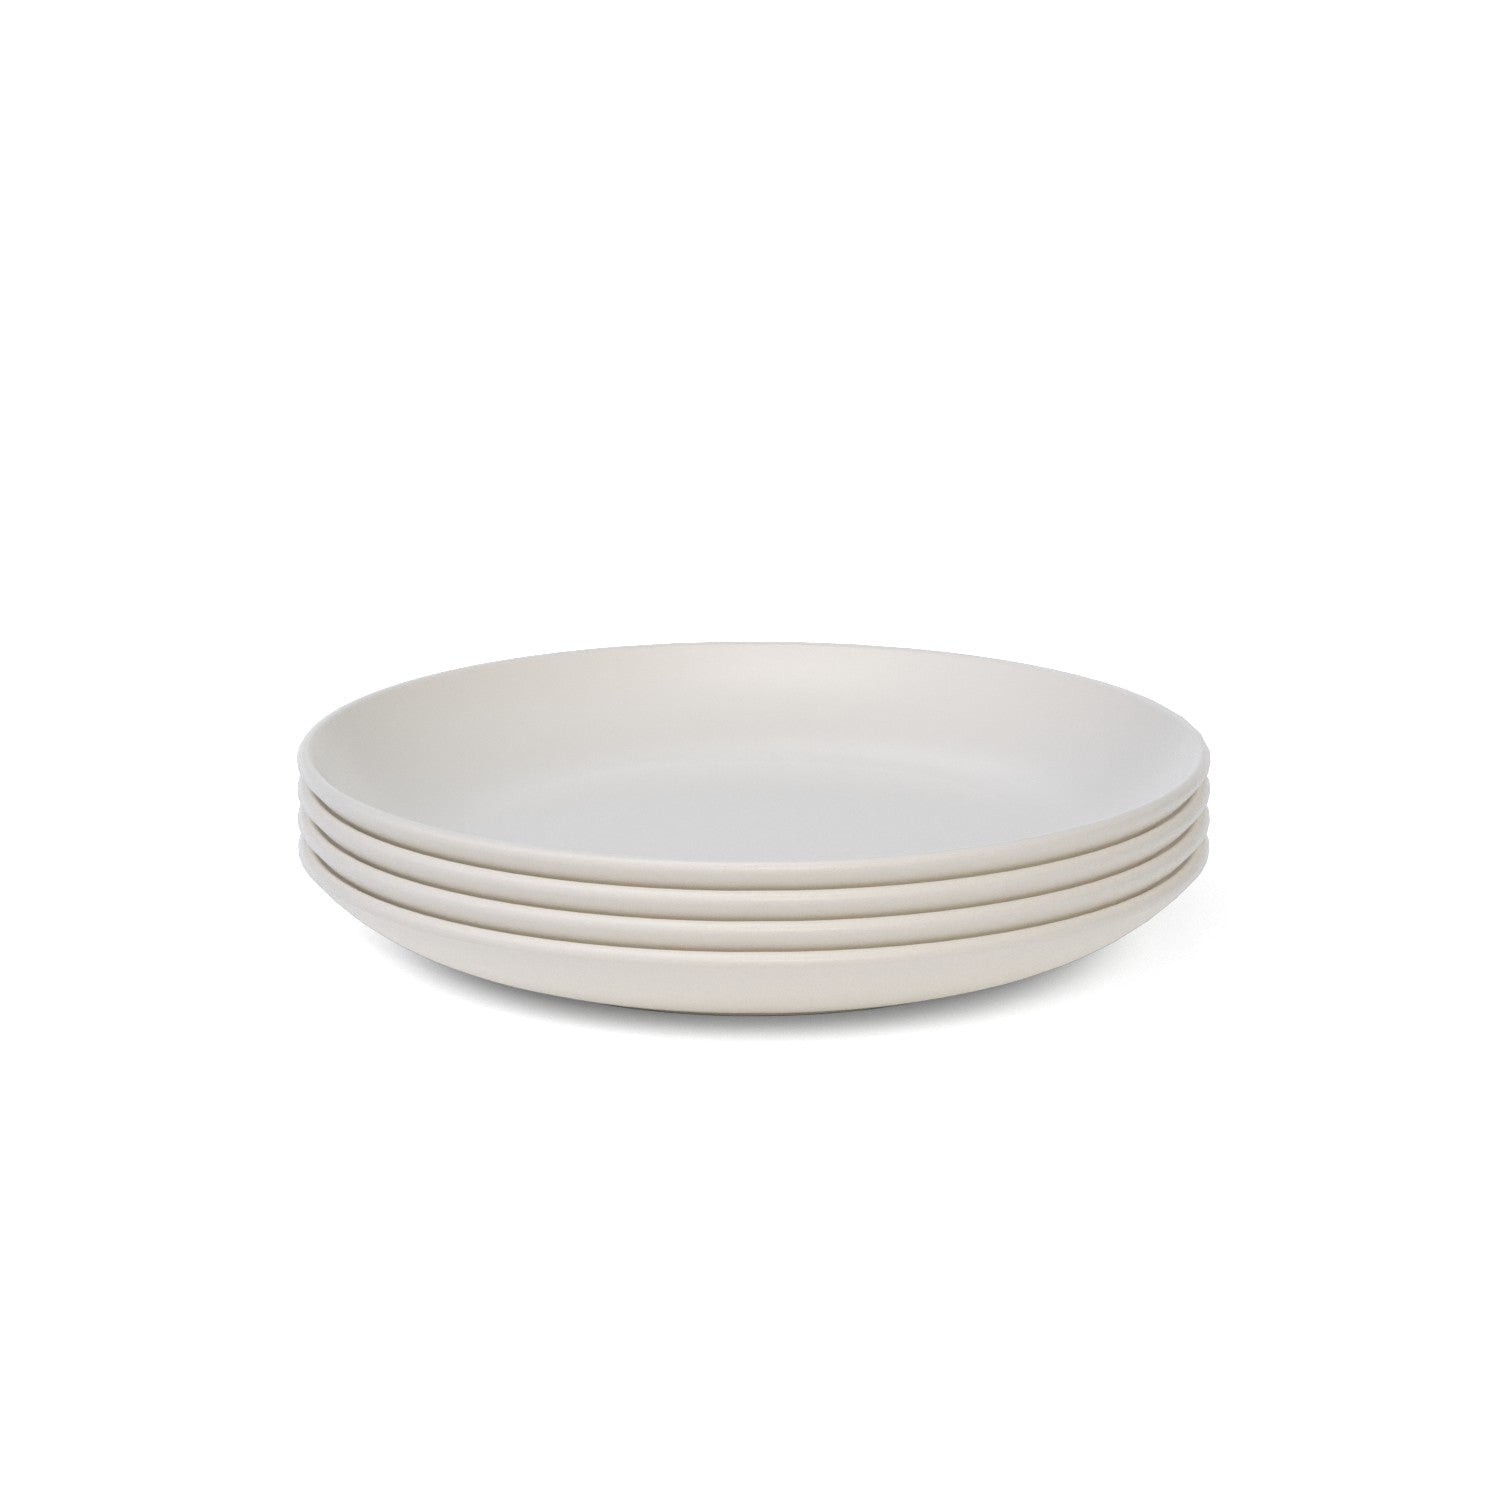 8 " Round Side Plate Set of 4 - Off White